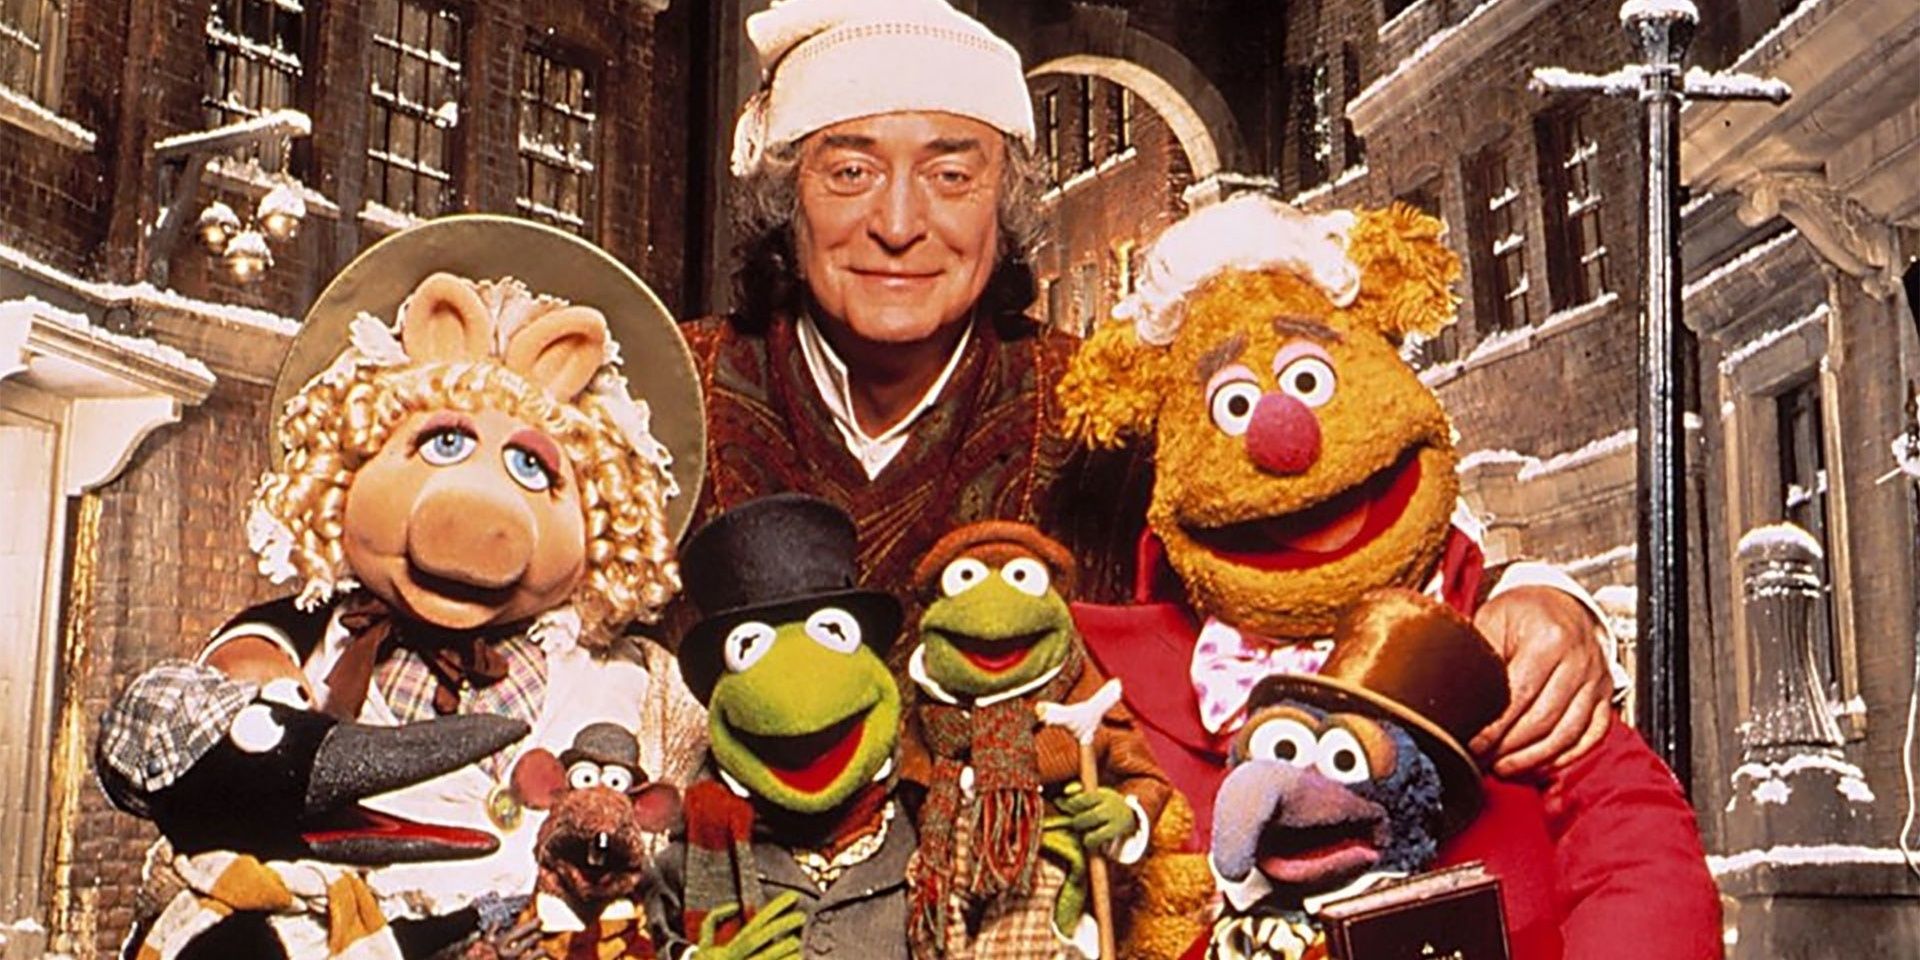 Michael Caine poses with the Muppets in The Muppet Christmas Carol